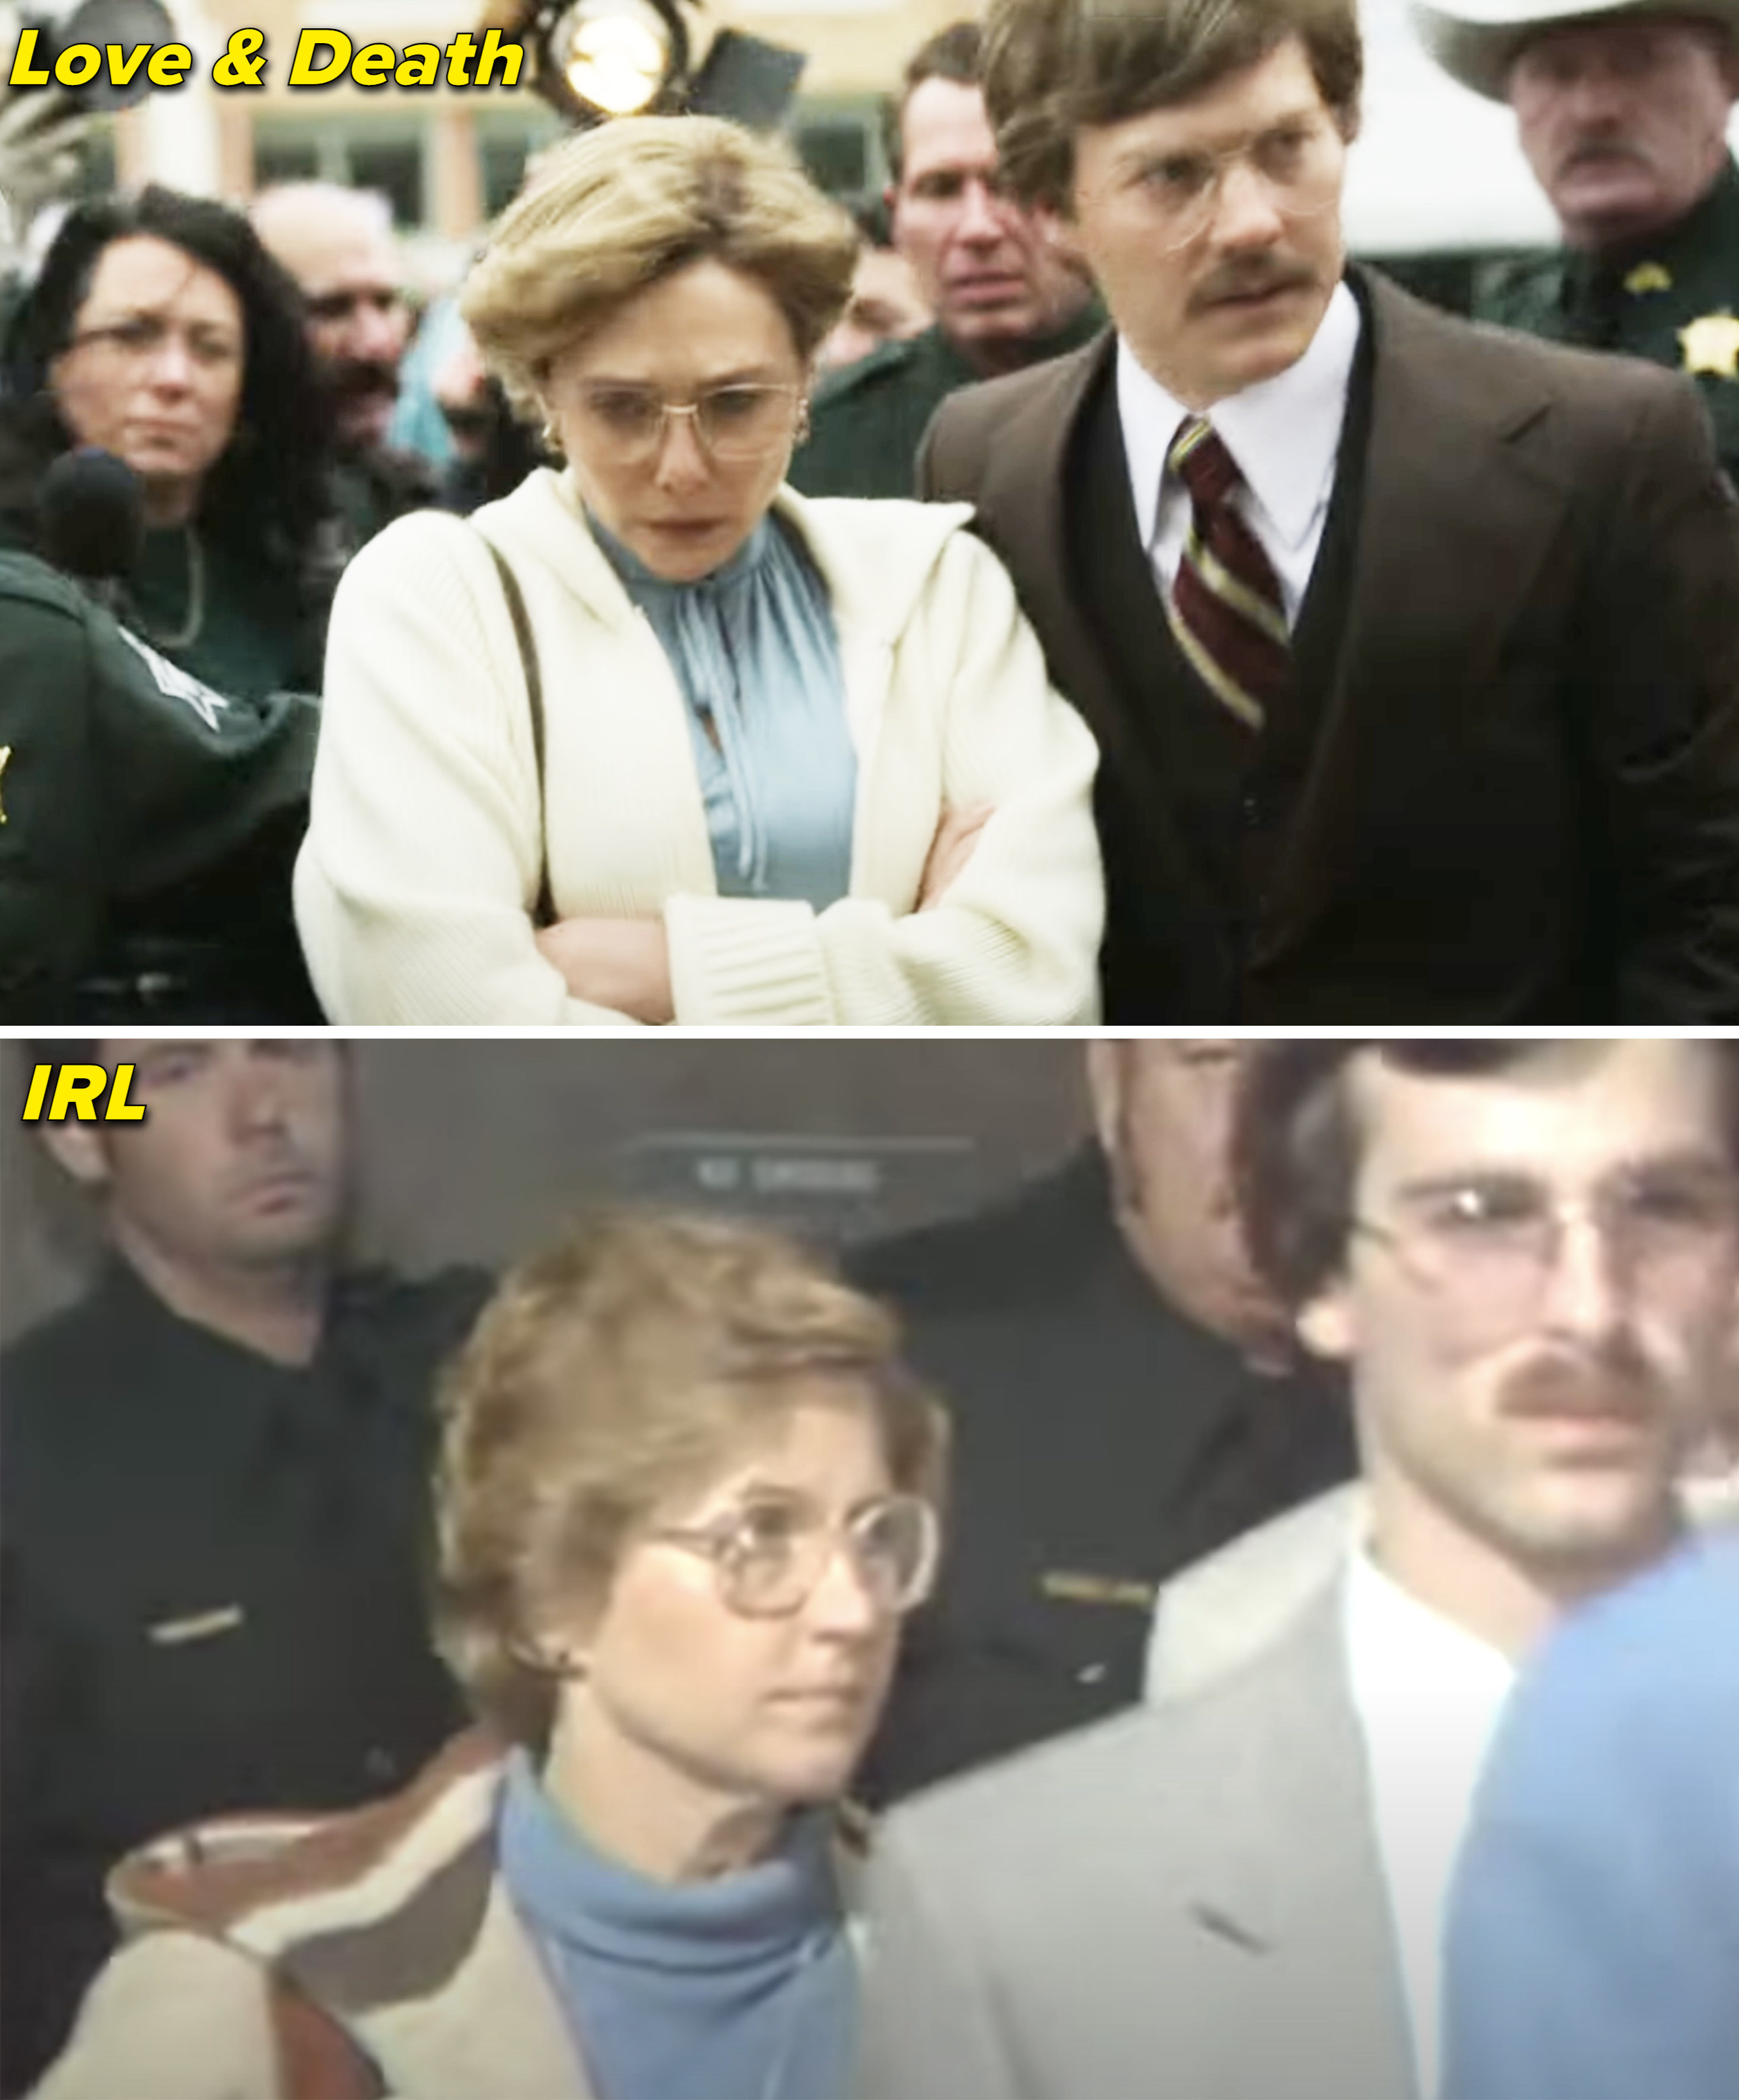 Elisabeth as Candy walking through a crowd, including police, in the top image and the real Candy in the same situation in the image below